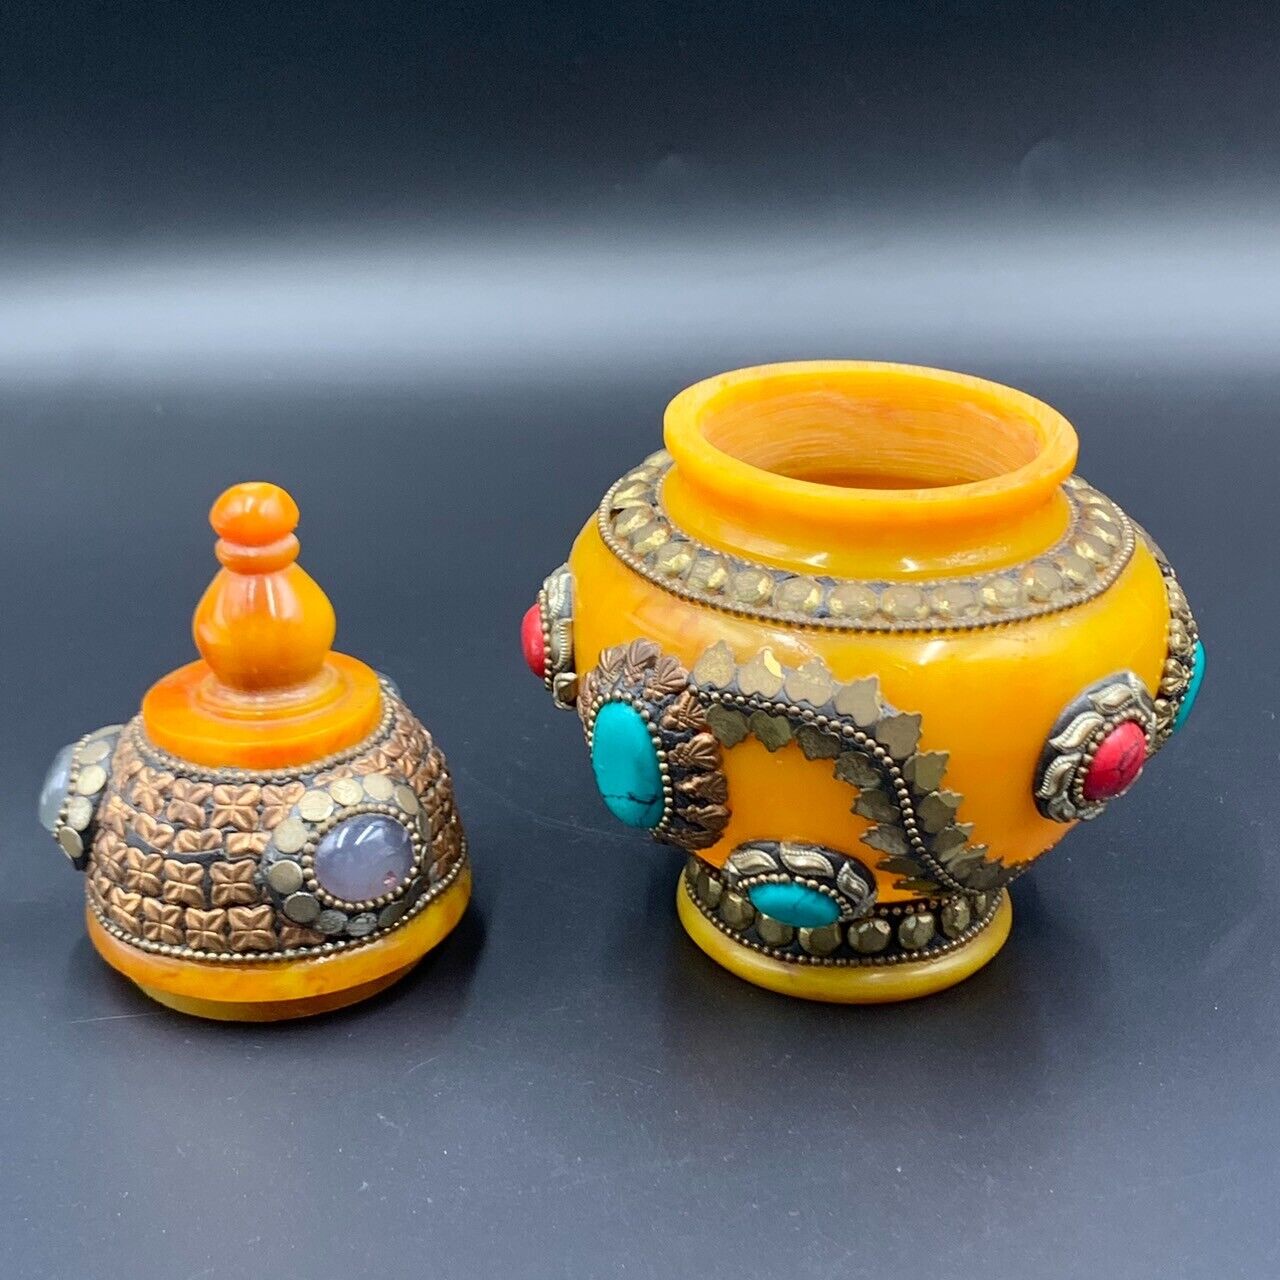 Vintage Handmade Old Nepalese Amber Jewel Jar With Agate Stones, Collectible - Image 4 of 5